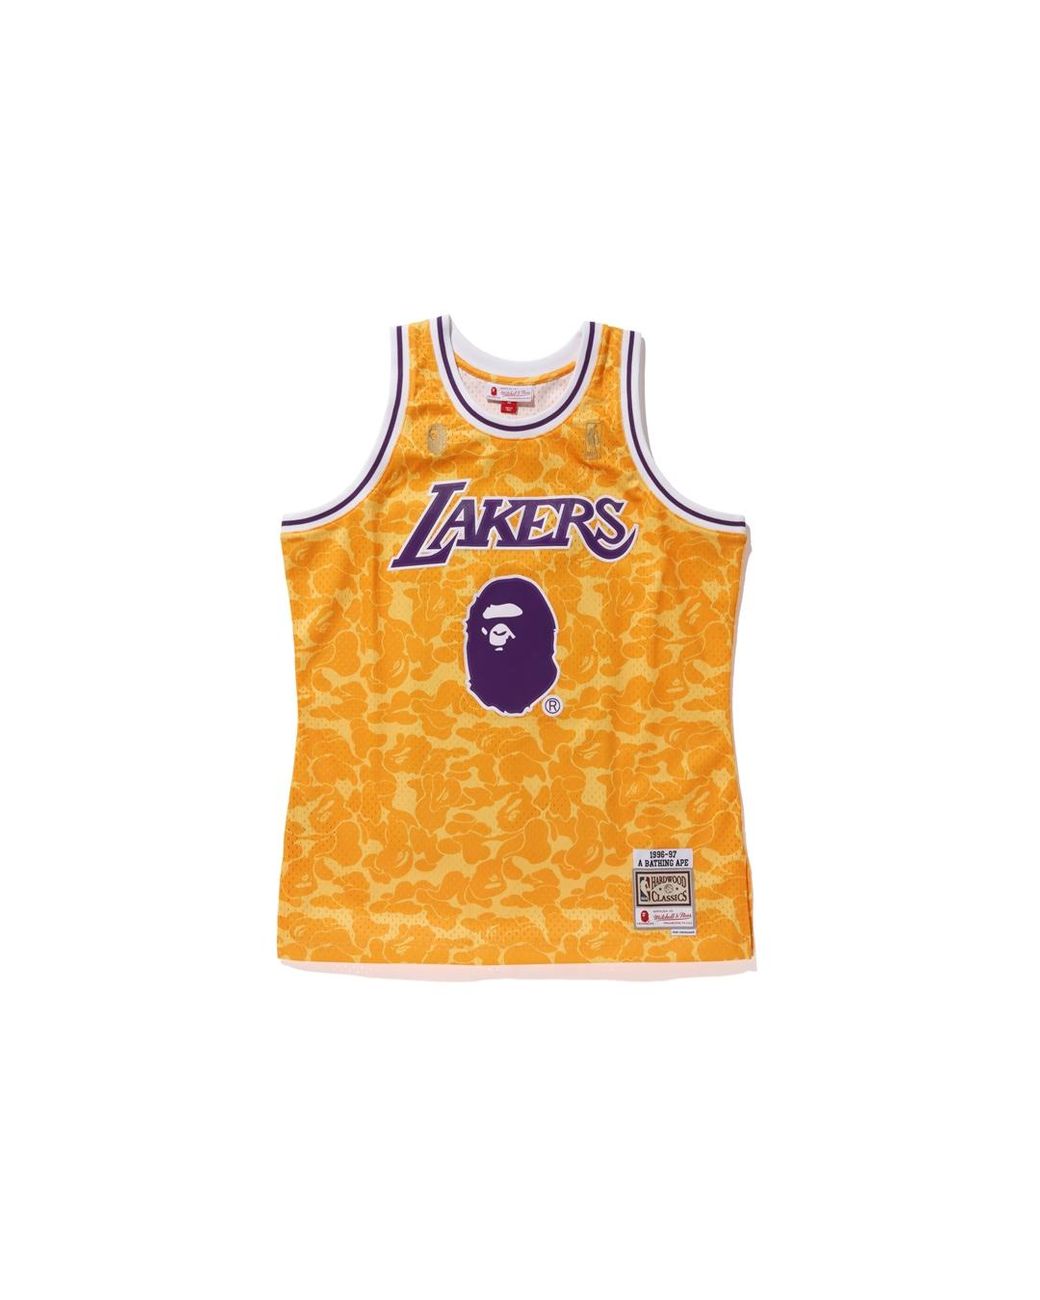 lakers vests